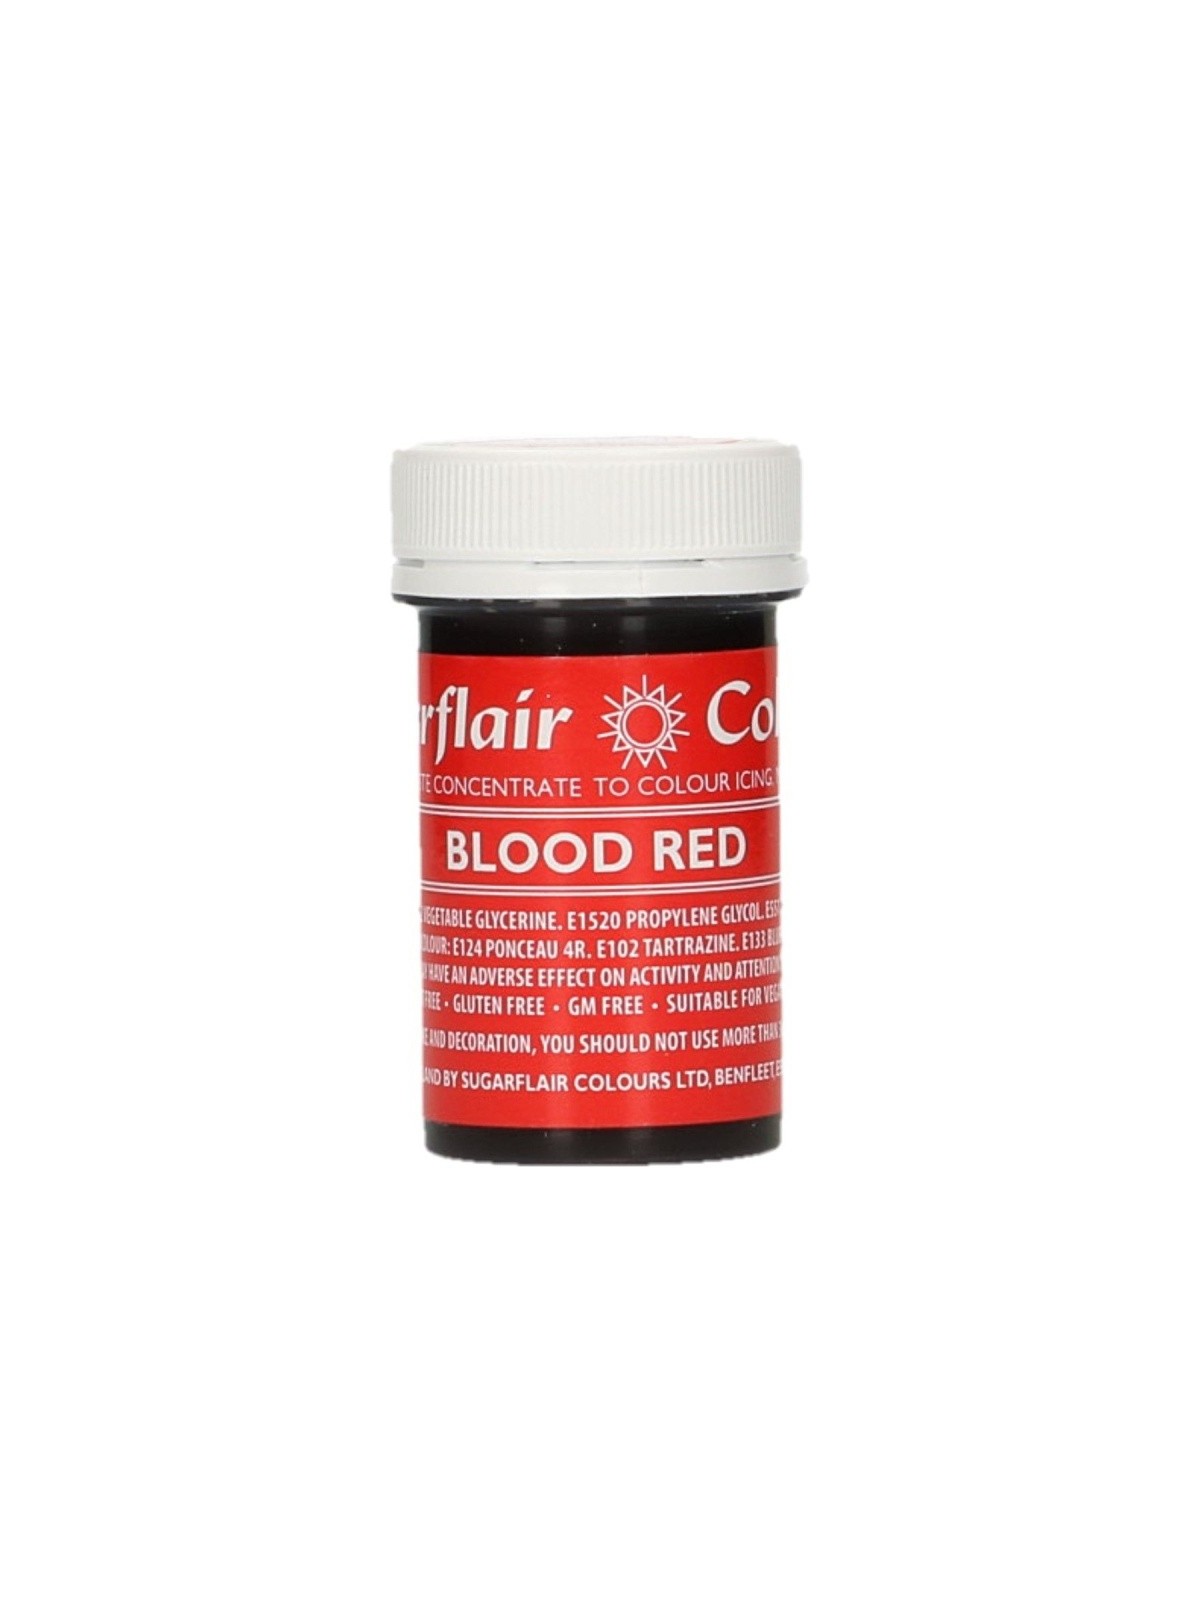 Sugarflair paste colour - Blood red  25g